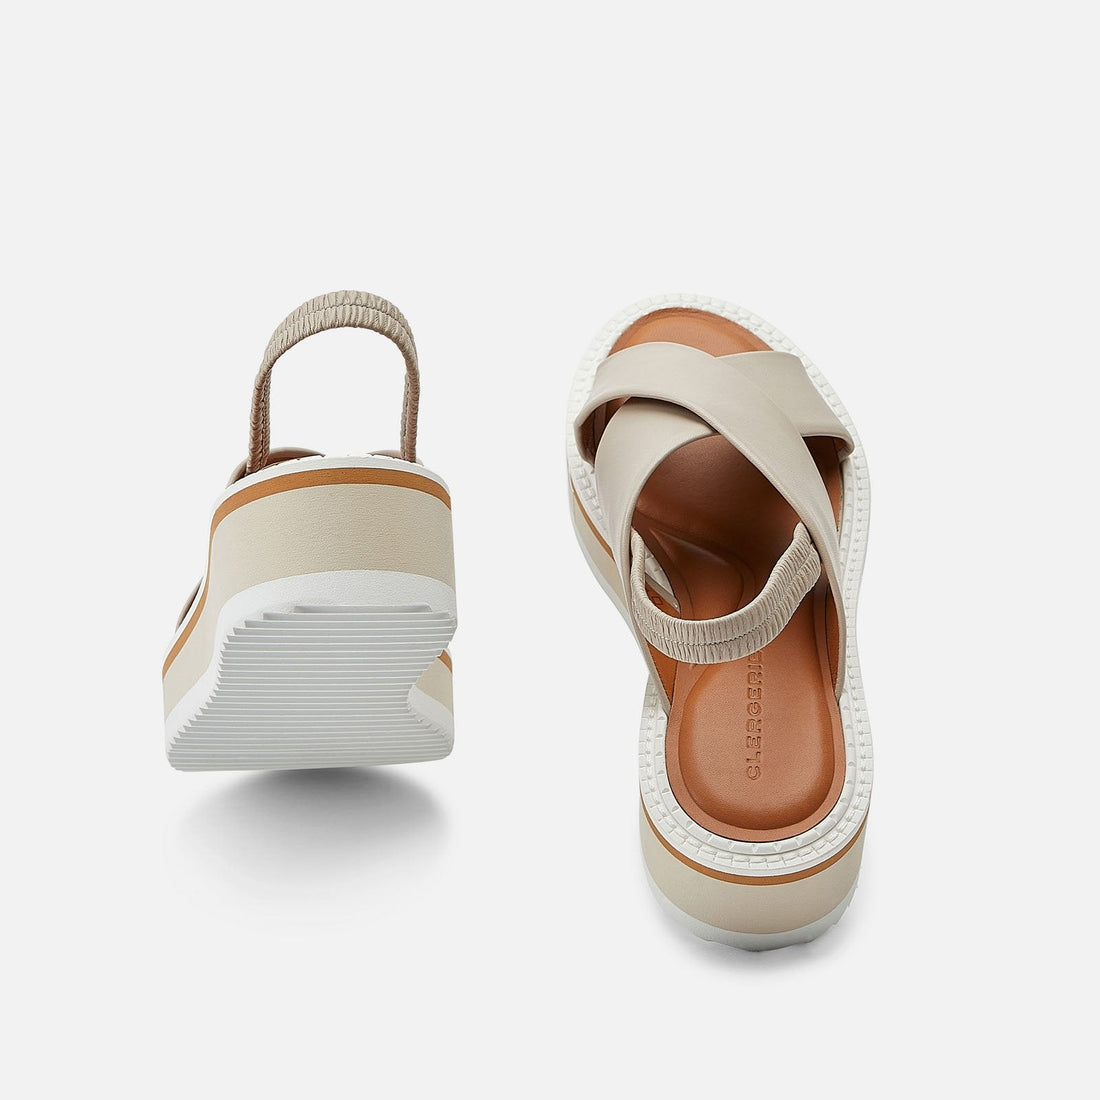 SANDALS - FREEDOM sandals, nude || OUTLET - FREEDOM5ARGNAPM350 - Clergerie Paris - USA